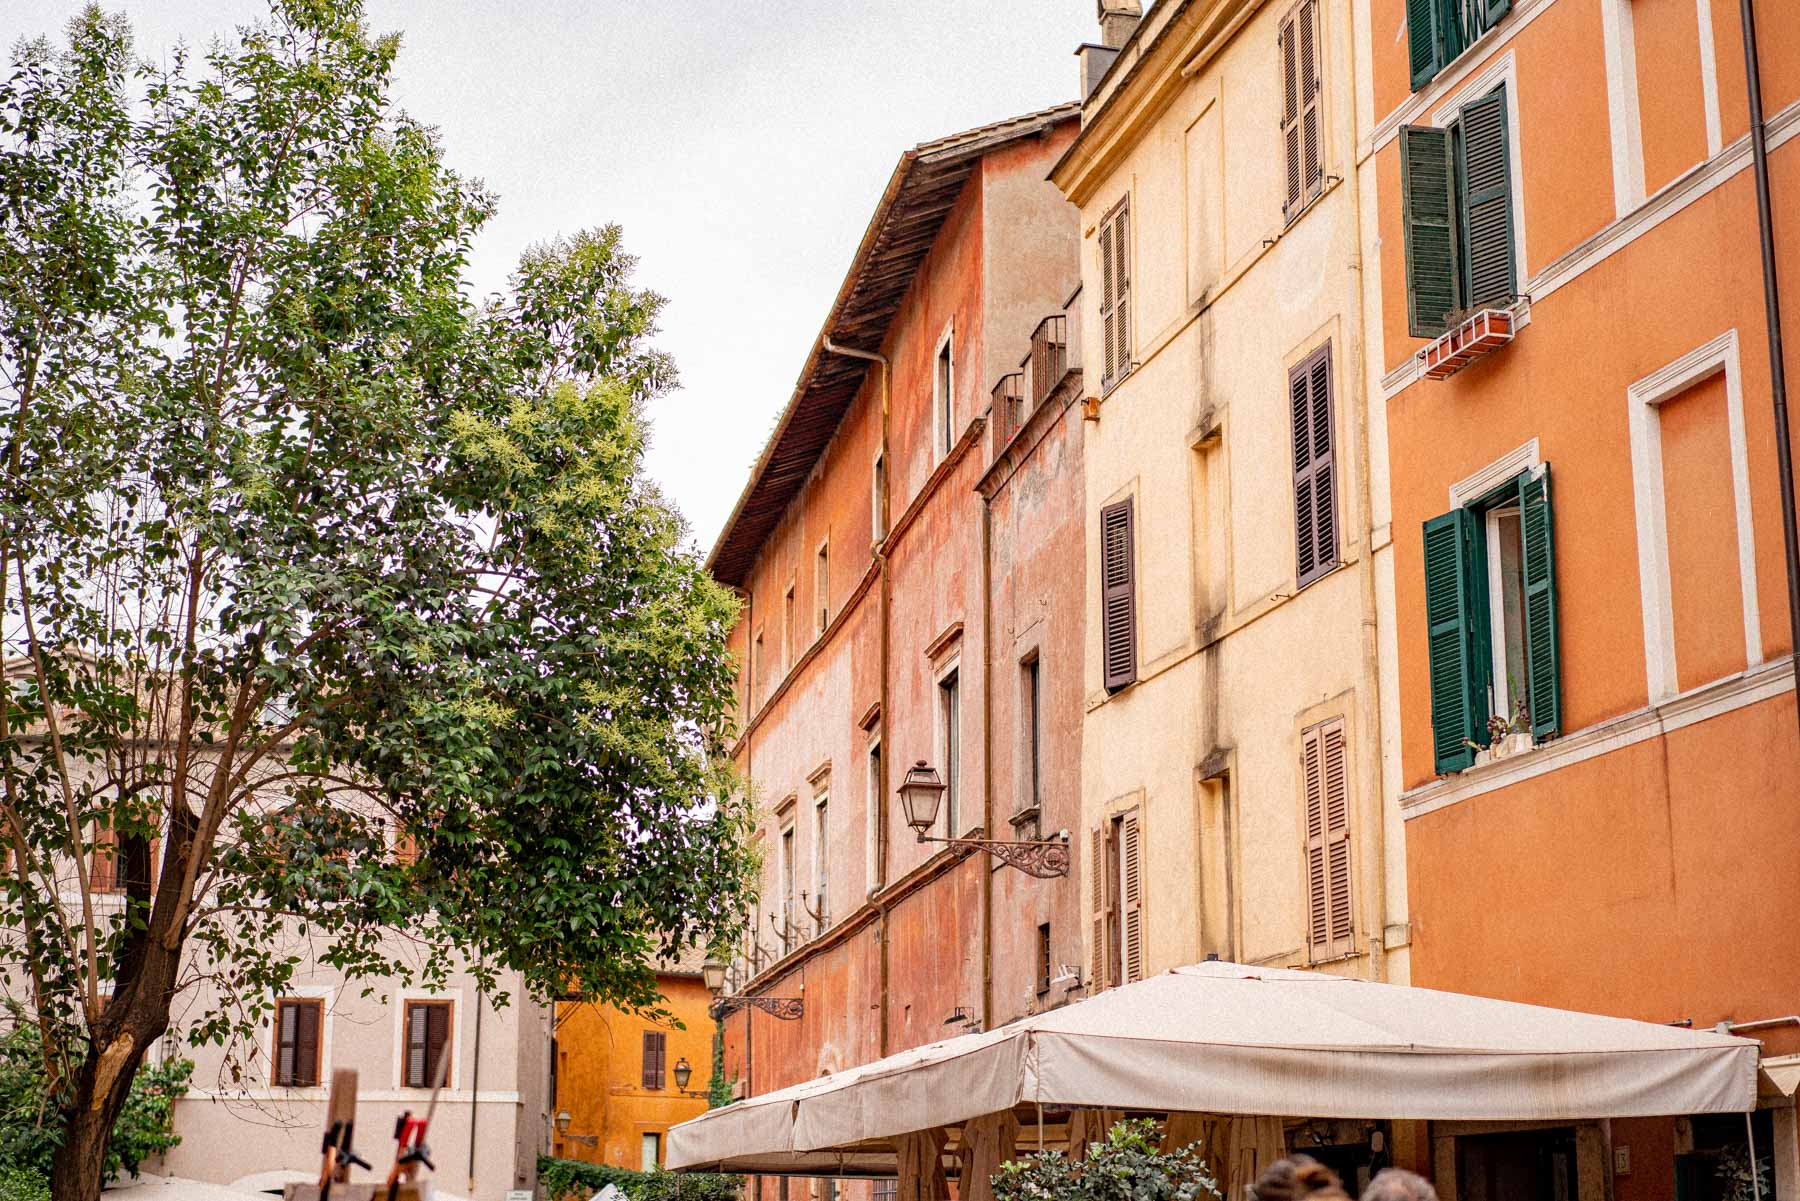 Where to stay in Rome